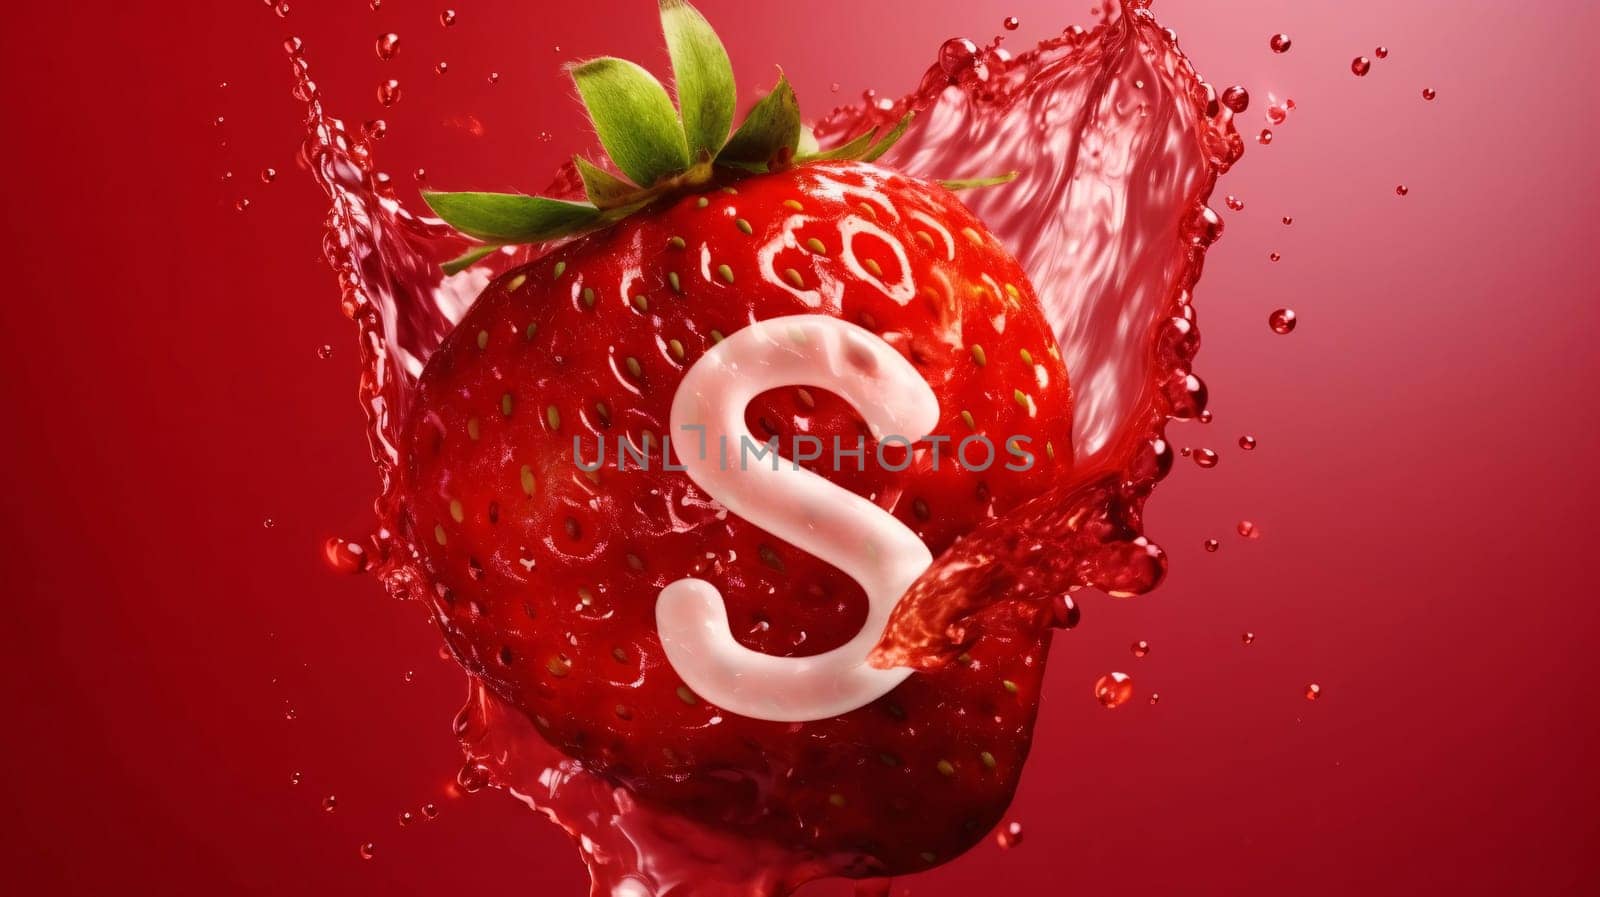 Graphic alphabet letters: strawberry with letter s in water splash, 3d illustration